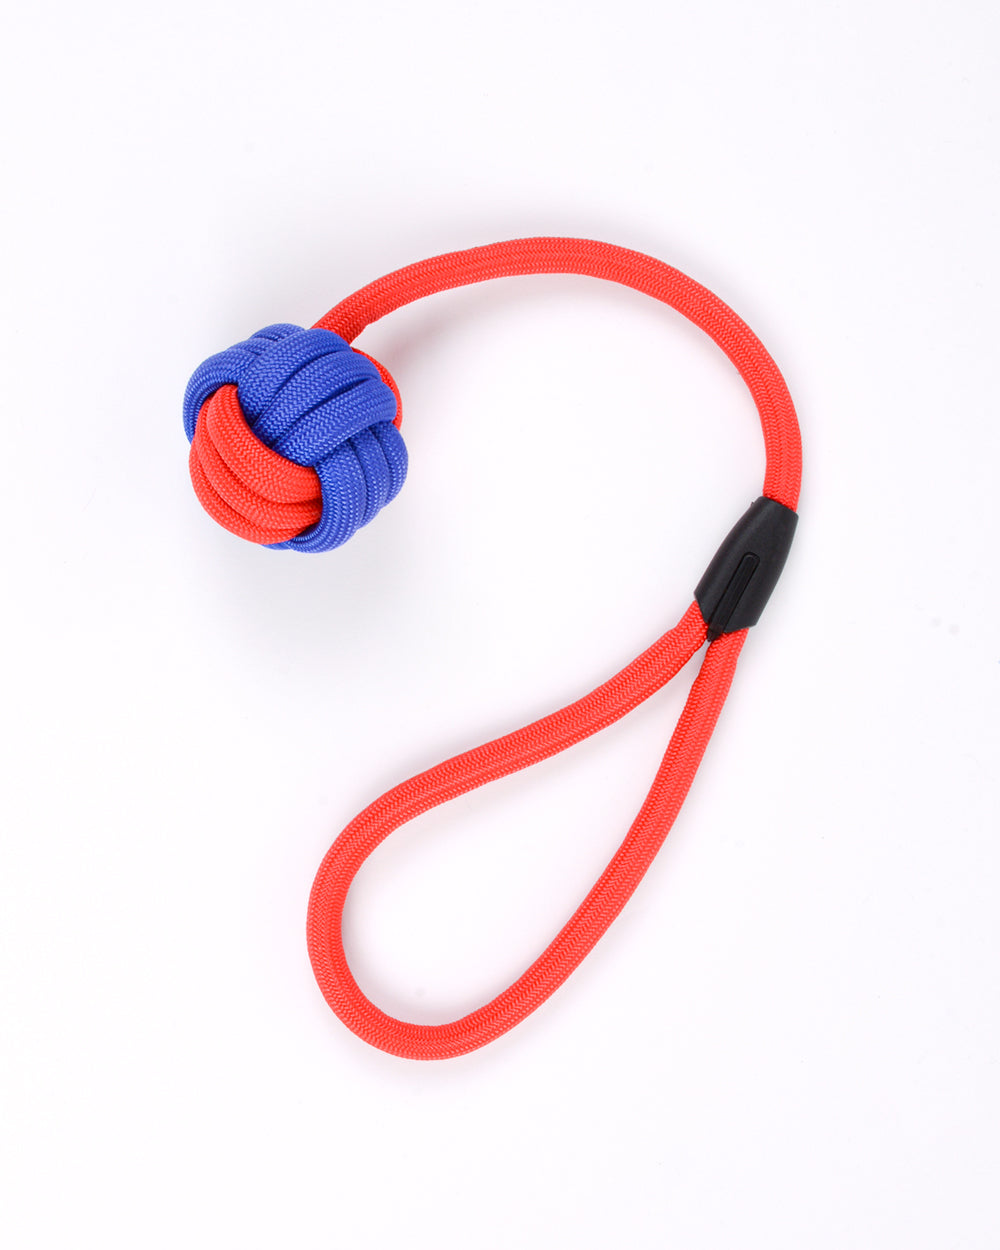 Nylon Rope and Ball Tug Toy With Loop - Red-Blue